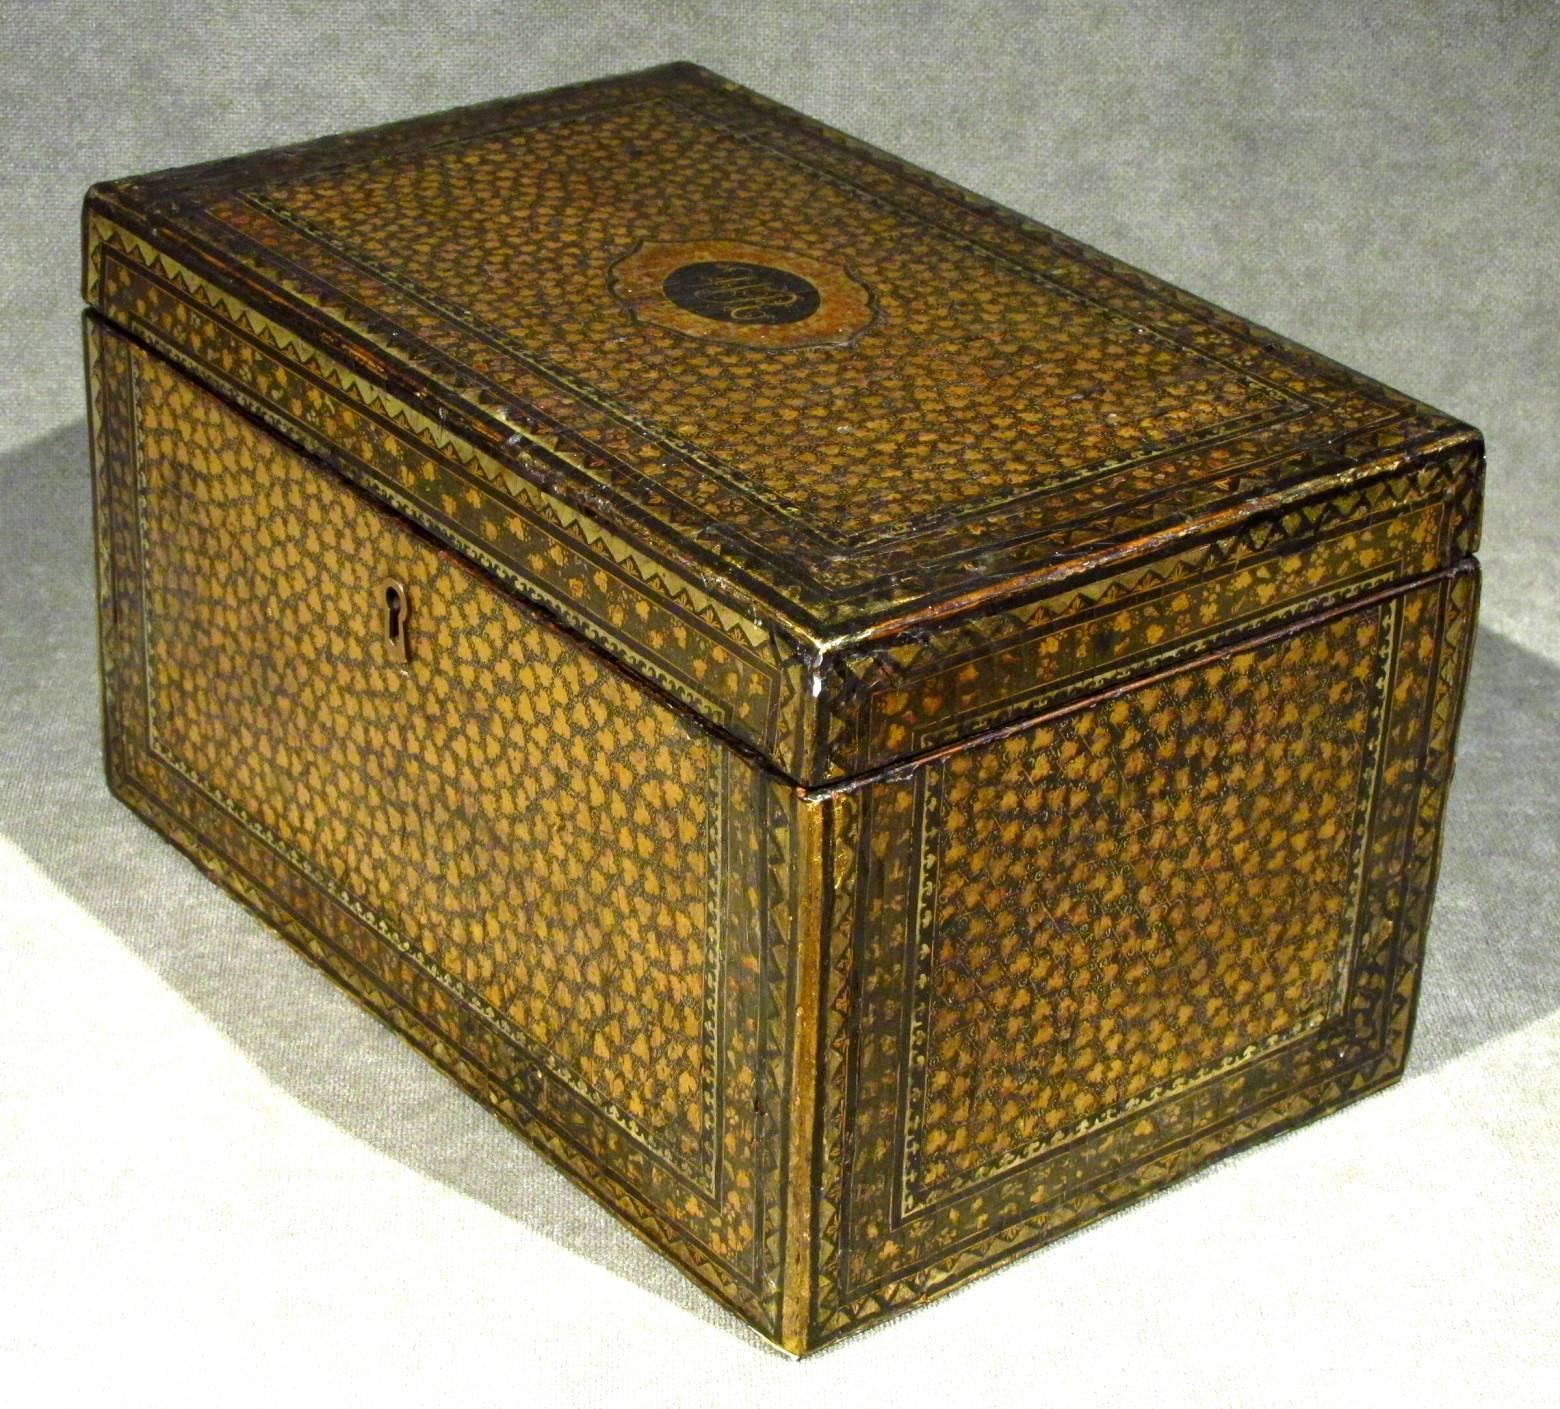 The exterior decorated overall in black lacquer with hand-painted gilt foliate motifs, the hinged lid opening to reveal three oblong pewter canisters, the central canister used for blending, flanked on either side by matching canisters intended for